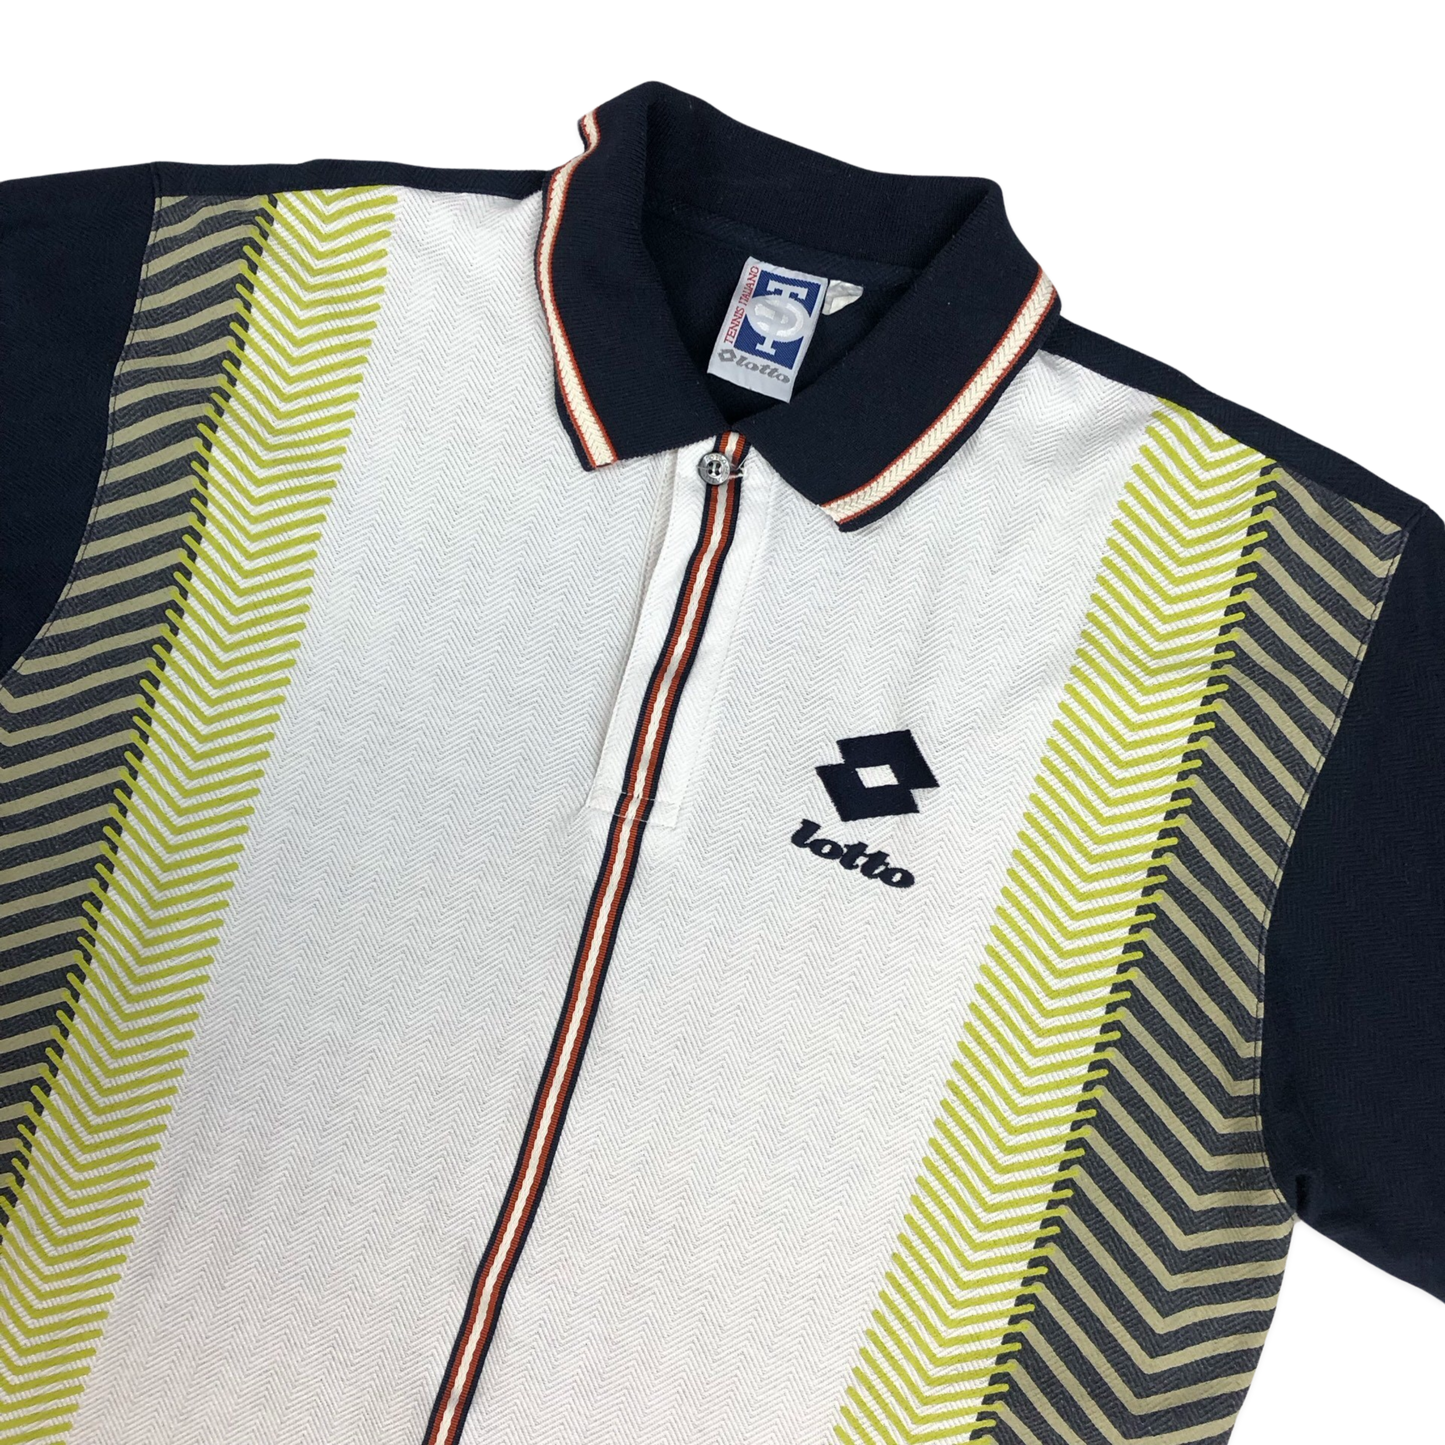 Vintage 80s 90s Lotto White, Green, and Navy Polo Shirt XL